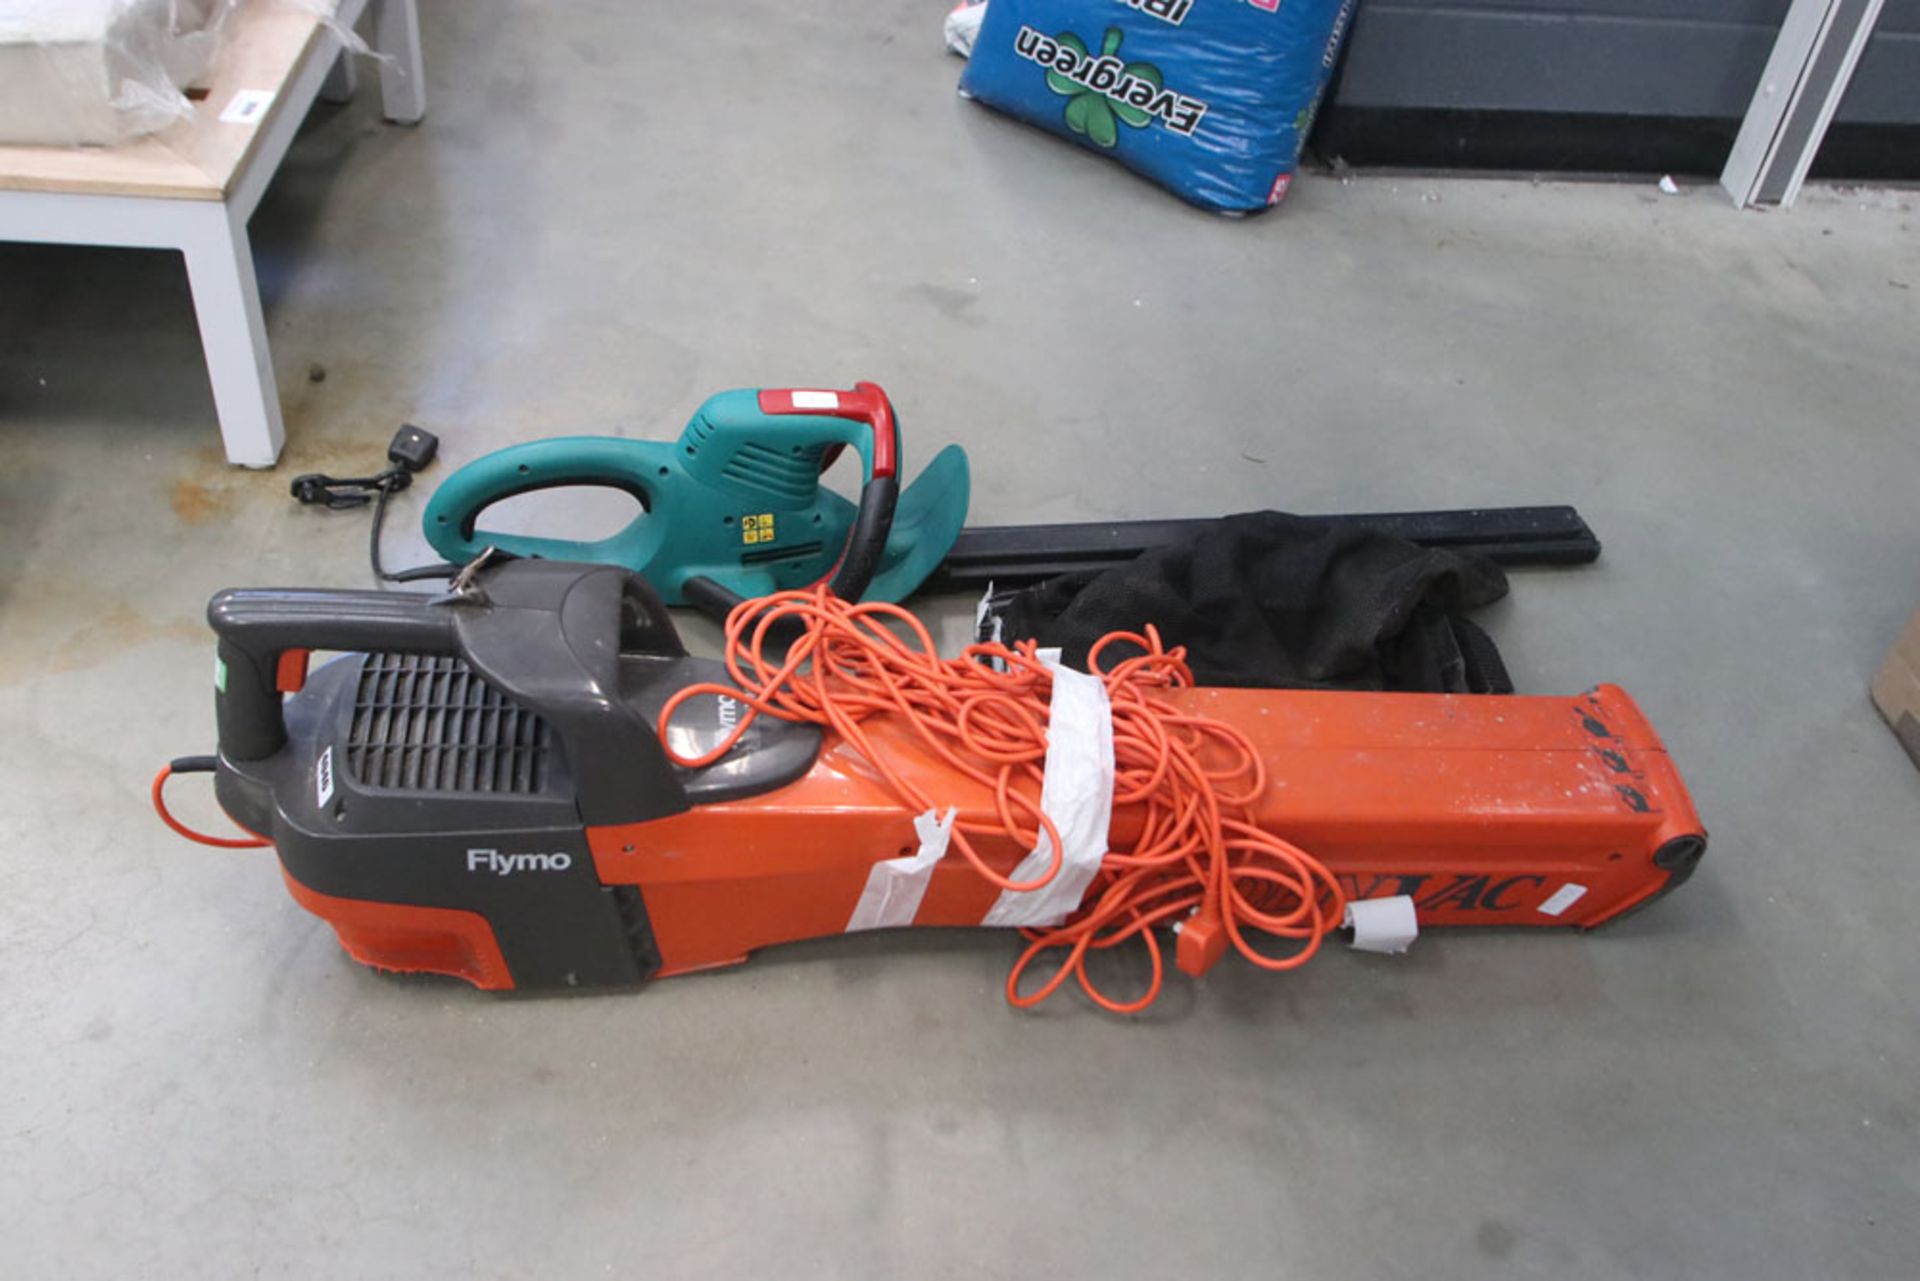 flymo blow vac and a Bosch electric hedge cutter - Image 2 of 2